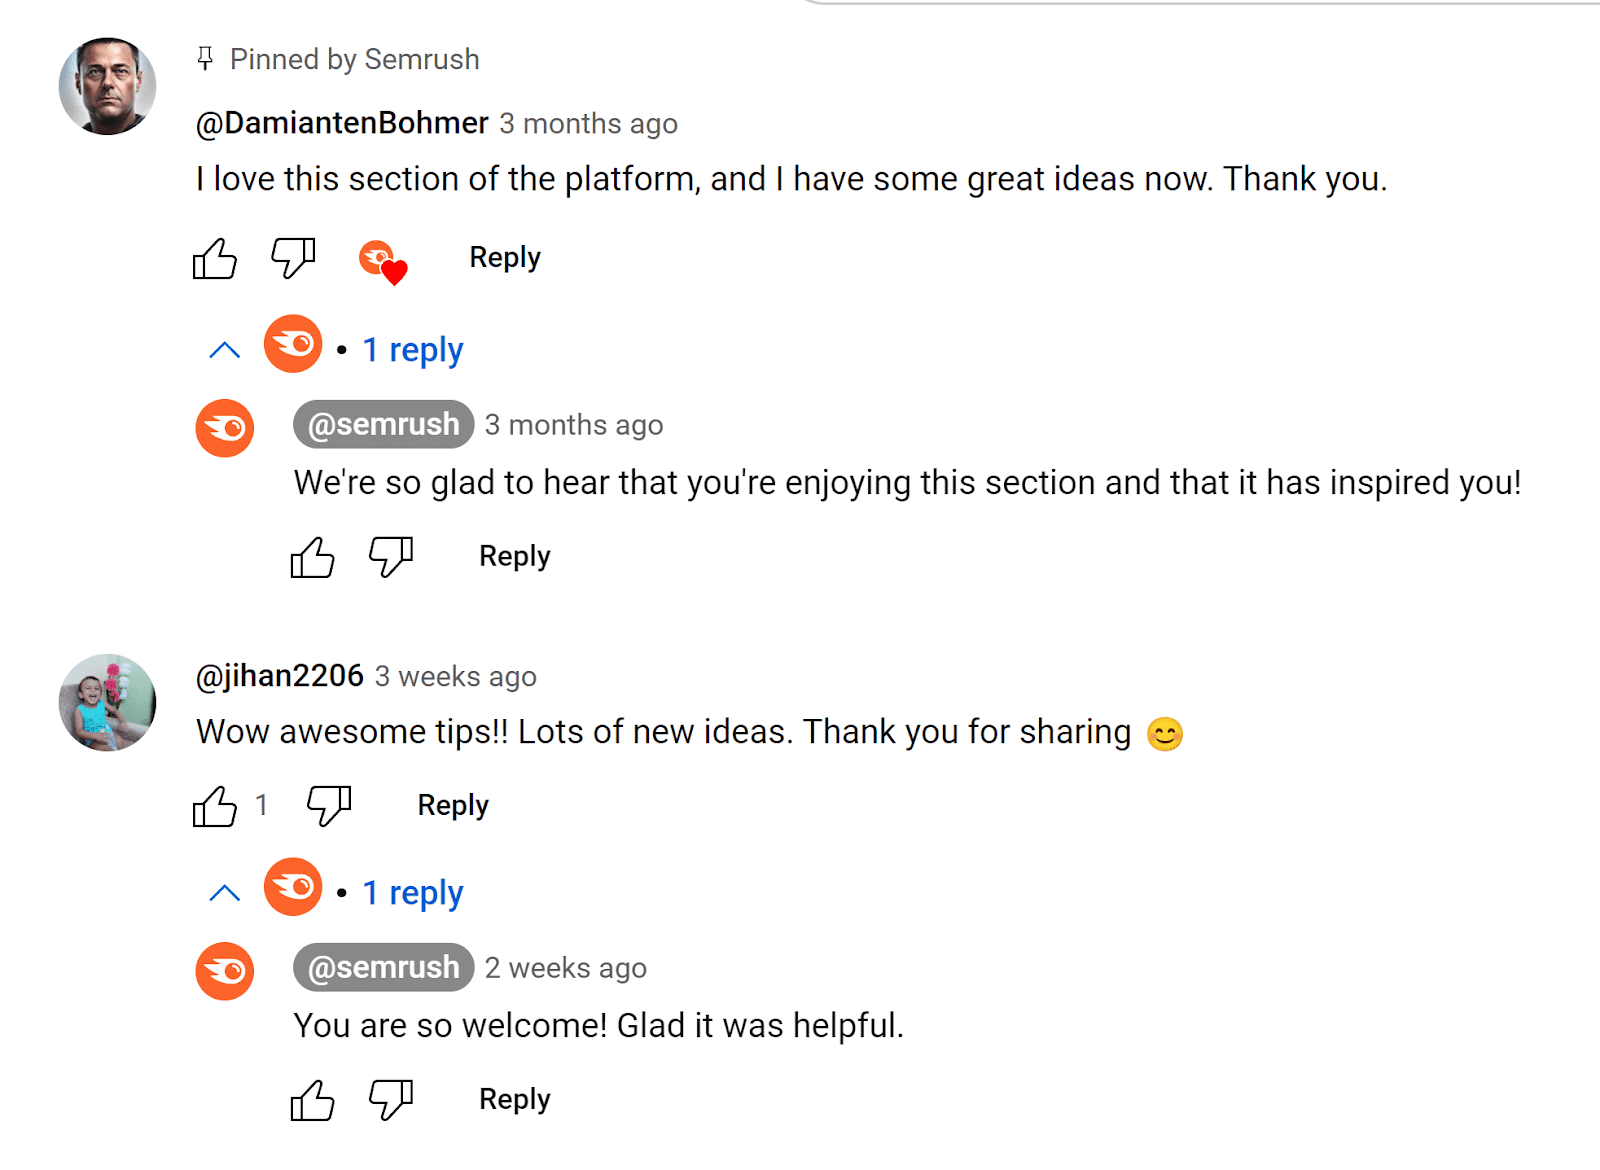 Replies to comments on Semrush YouTube video by Semrush.